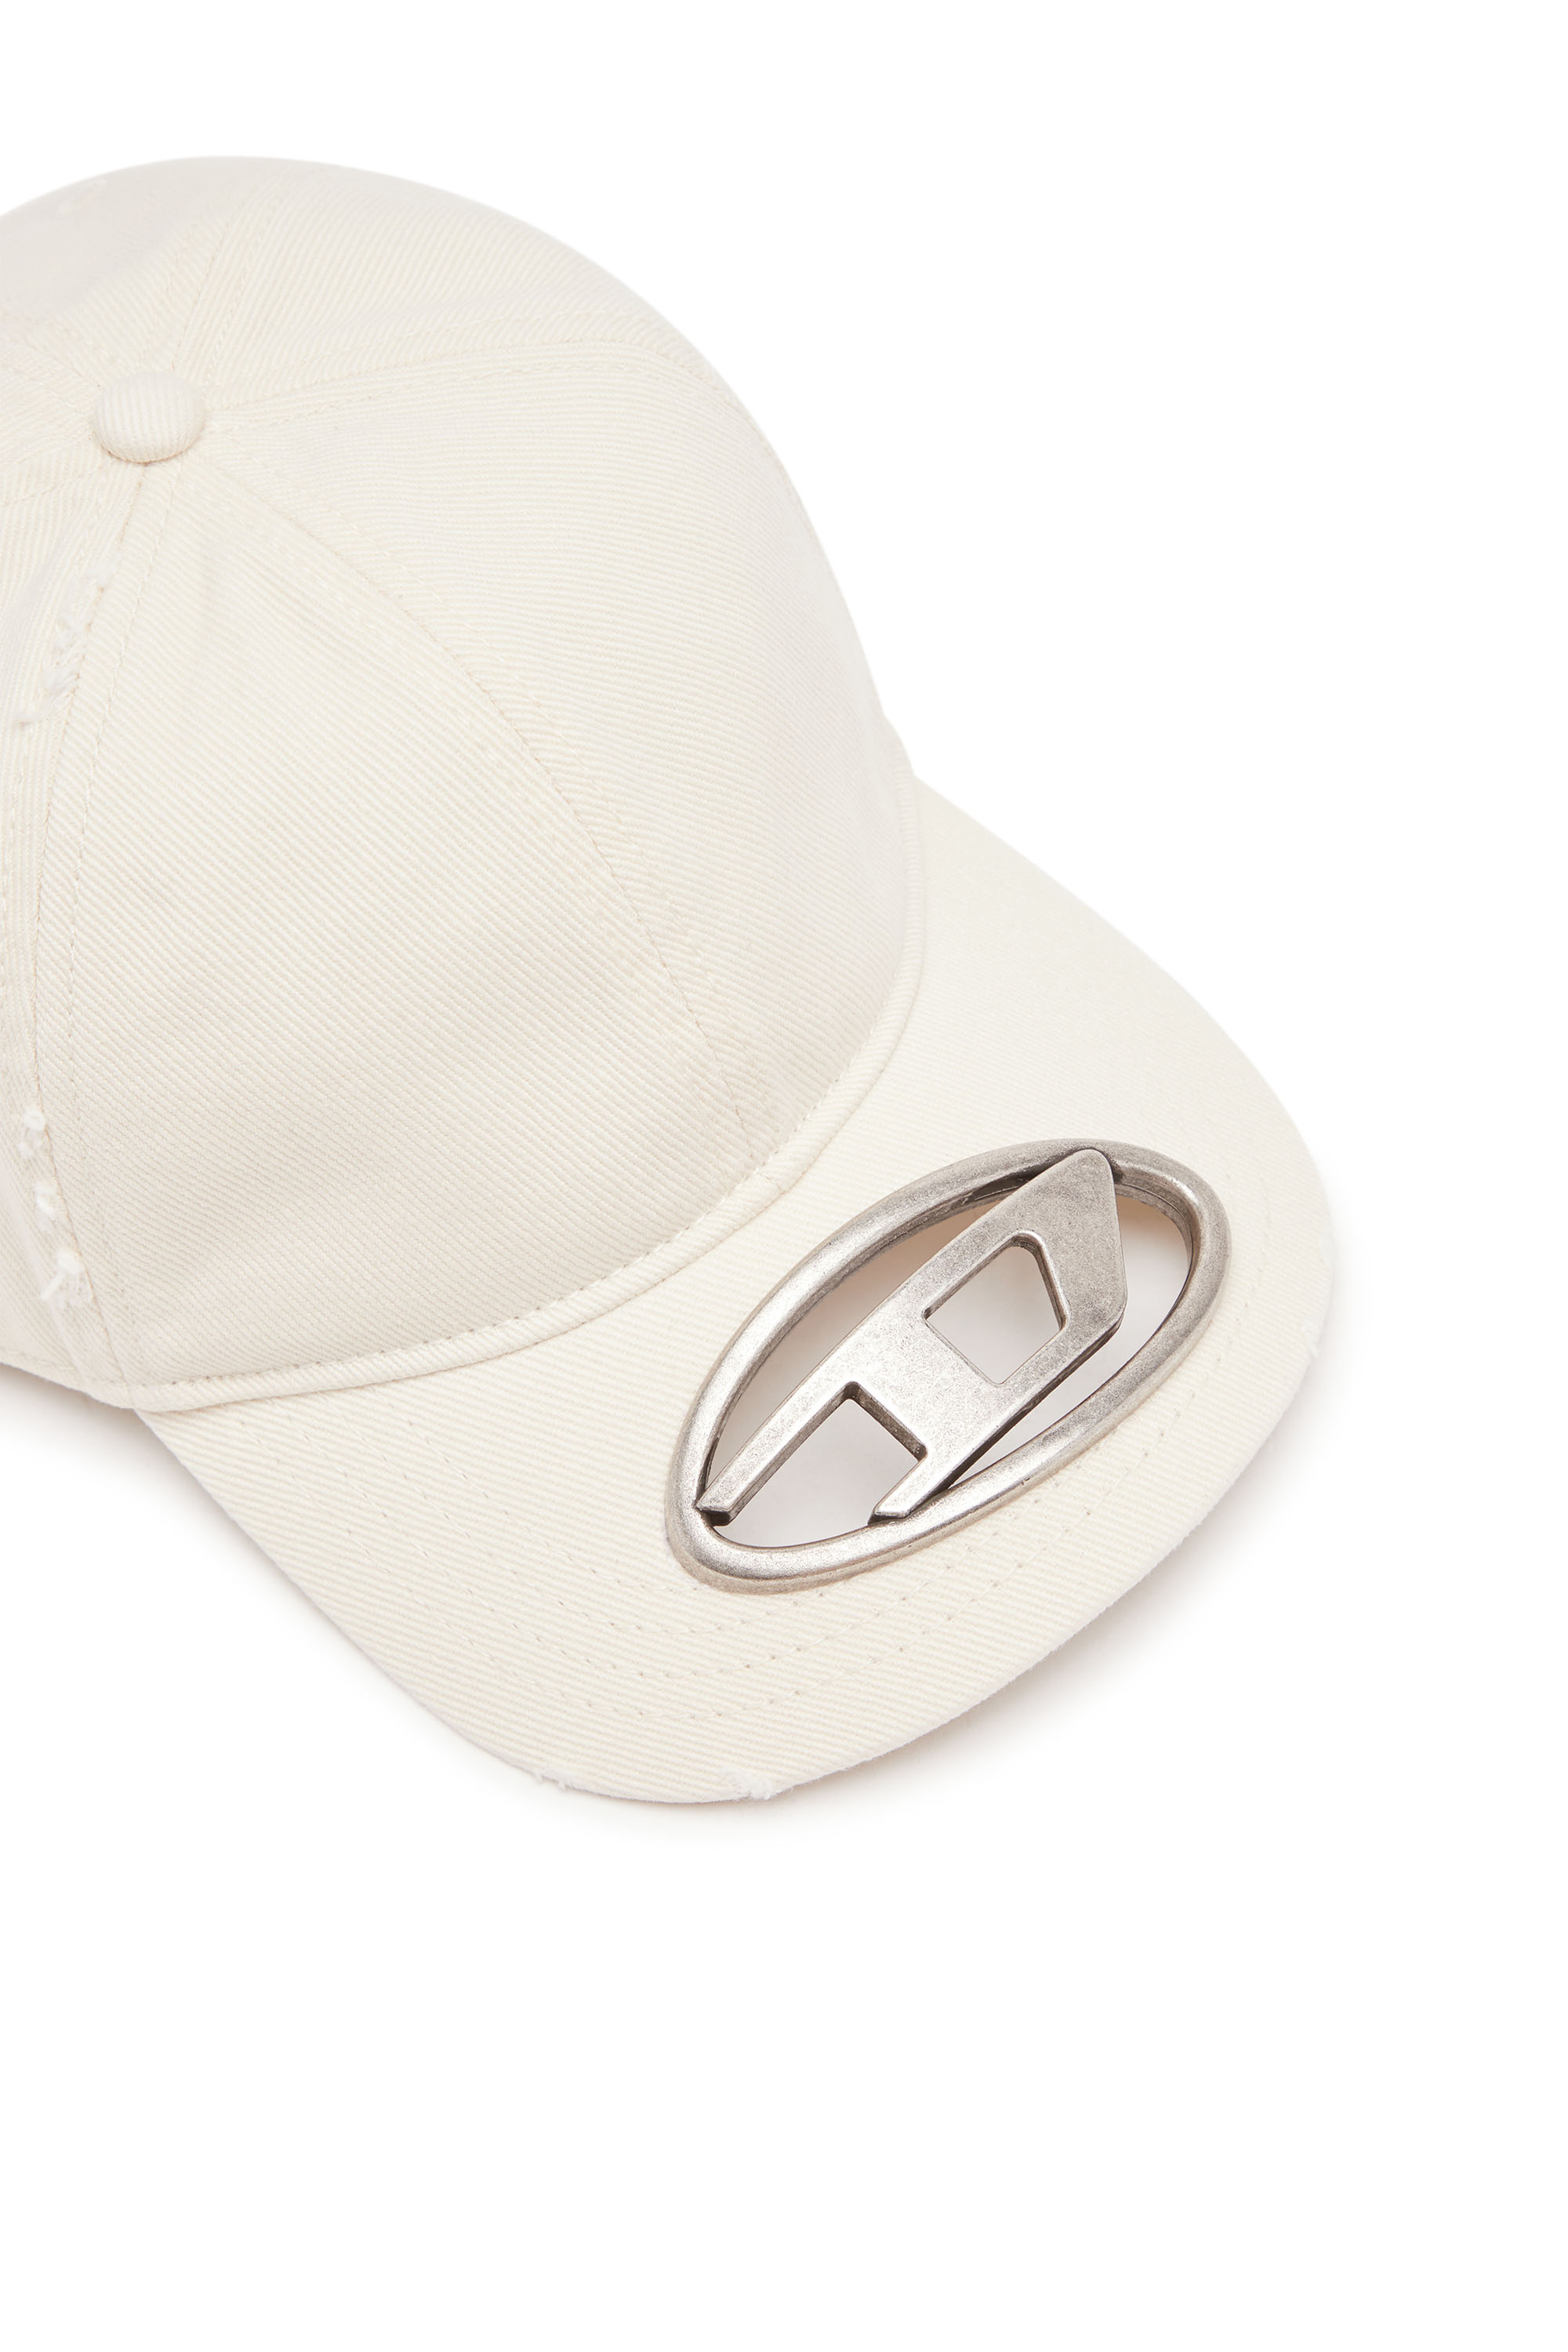 Diesel - C-BEAST-A1, Man Baseball cap with metal Oval D plaque in White - Image 3